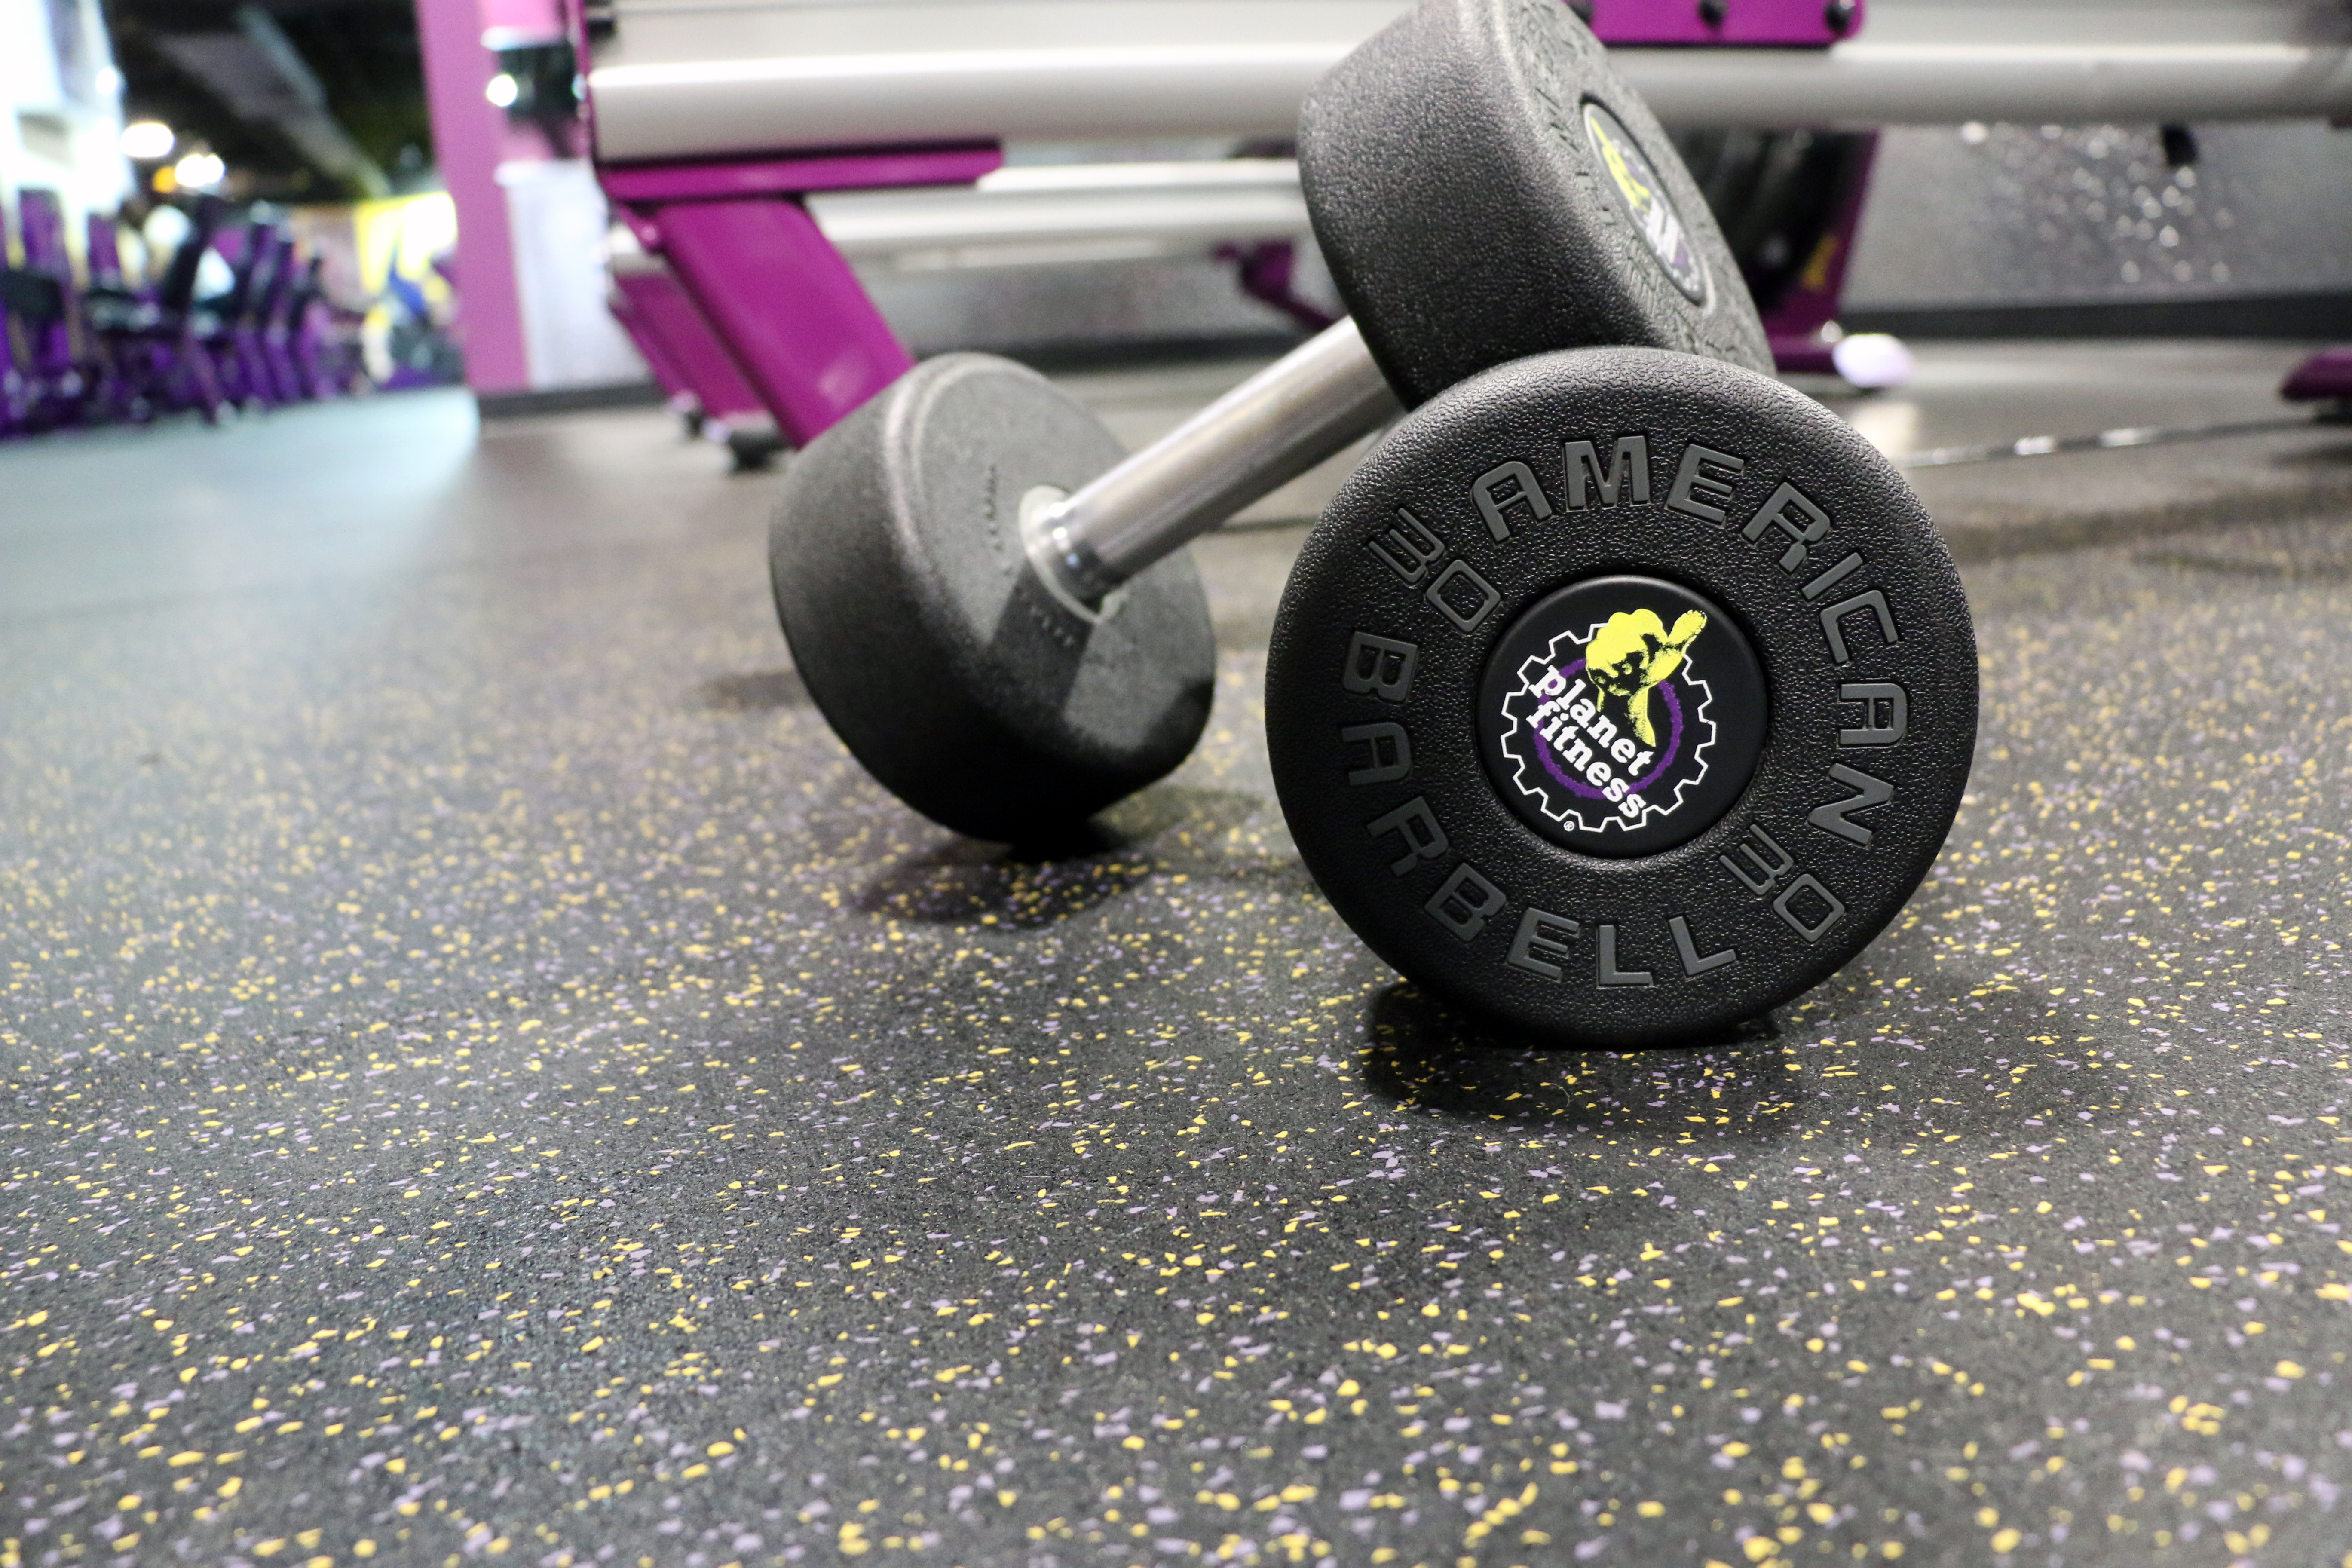 Ecore flooring at a Planet Fitness facility